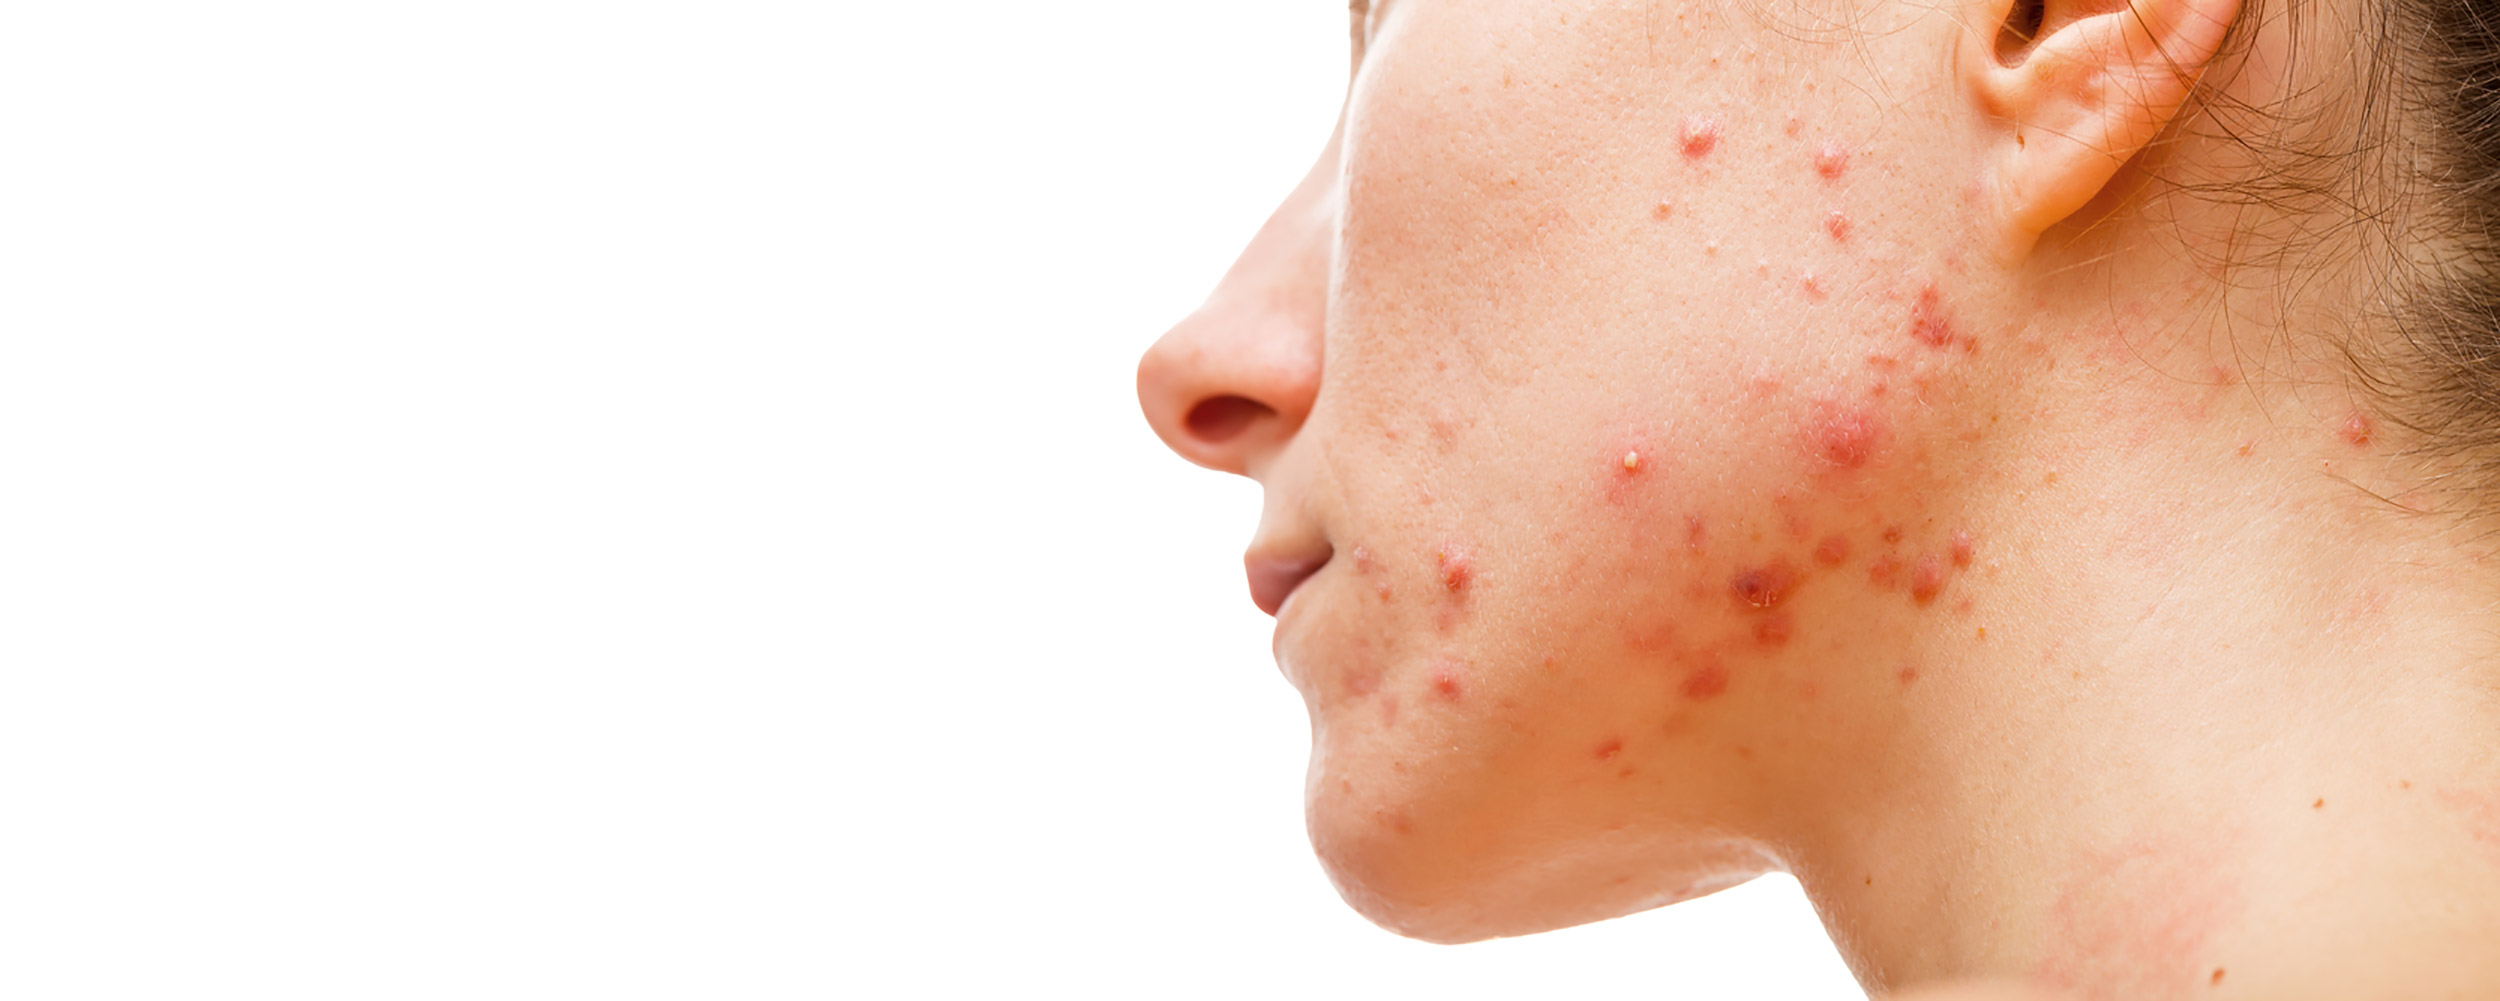 Acne: Overview, symptoms and treatment